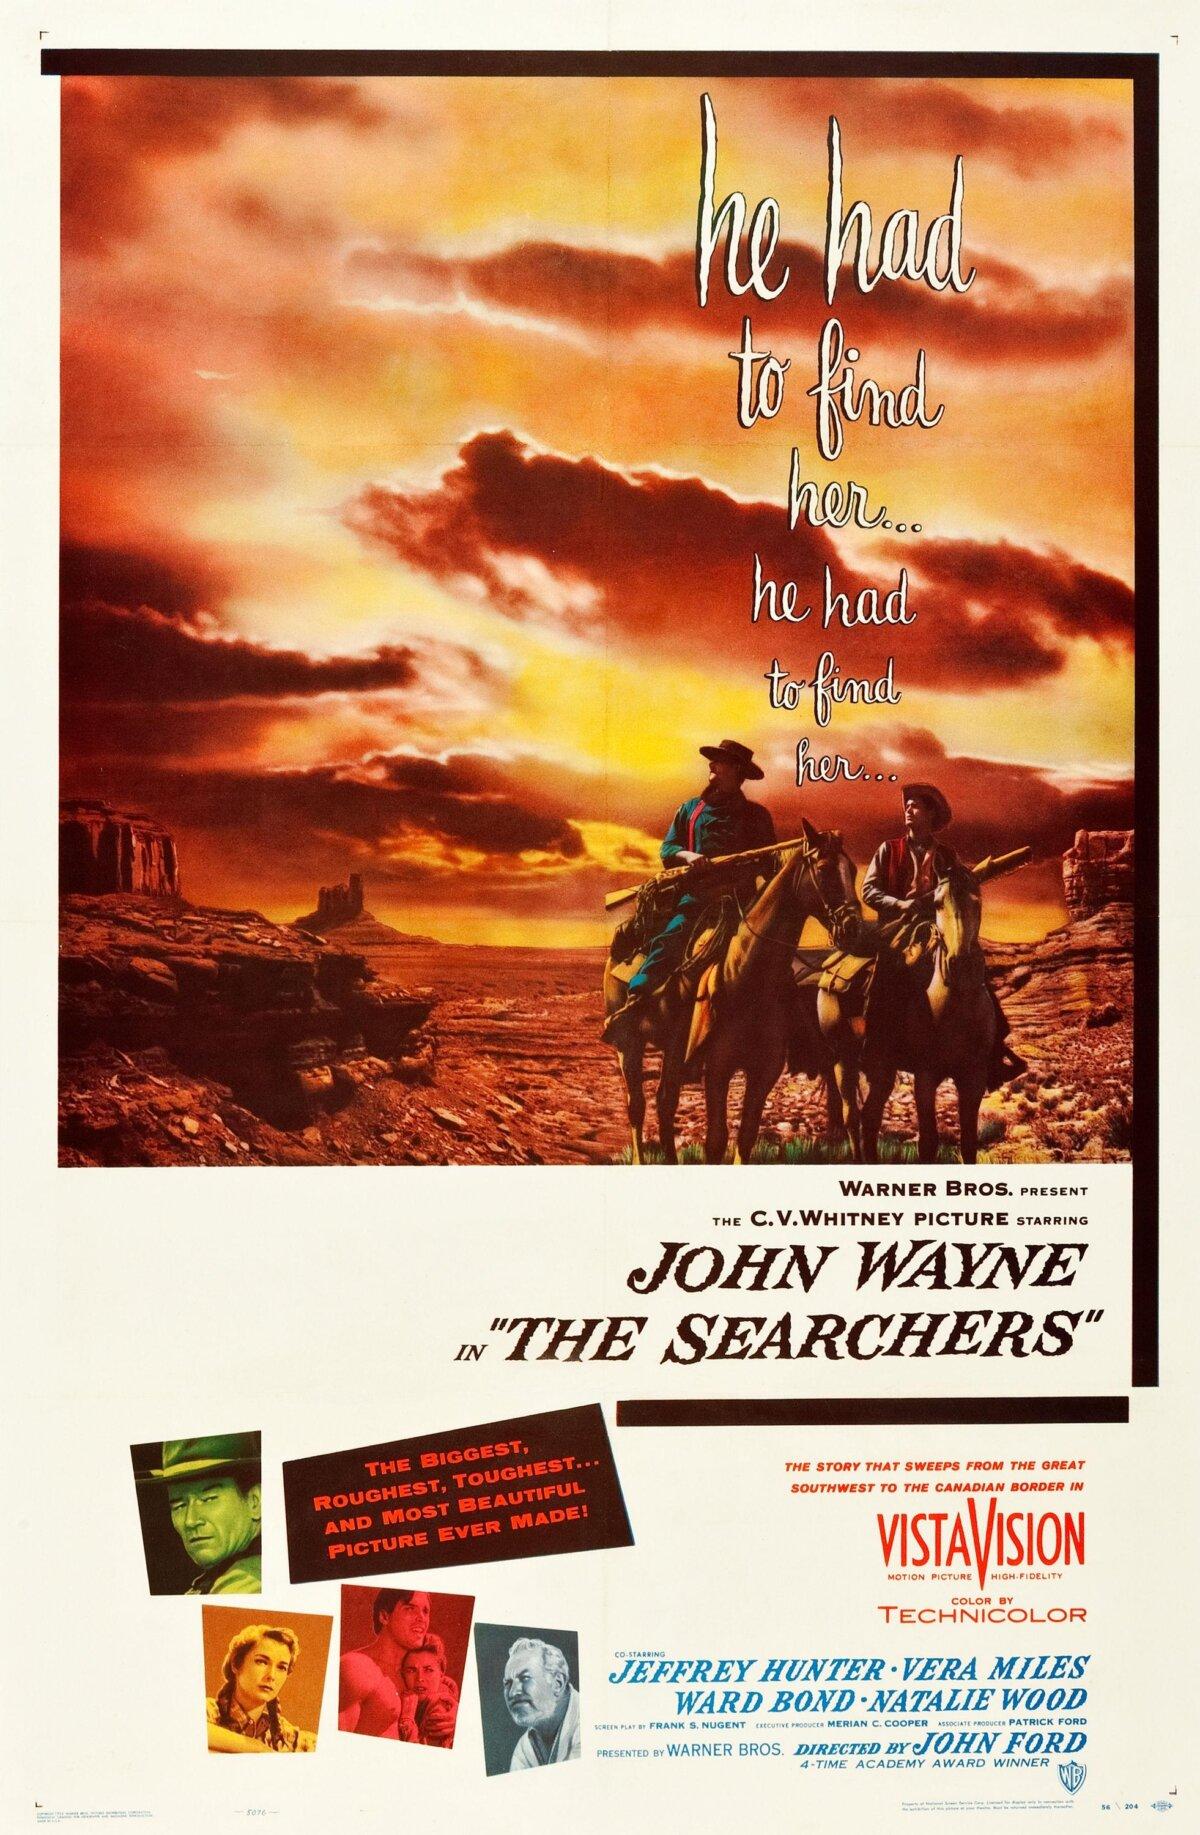 Theatrical poster for "The Searchers." (Warner Bros. Pictures)